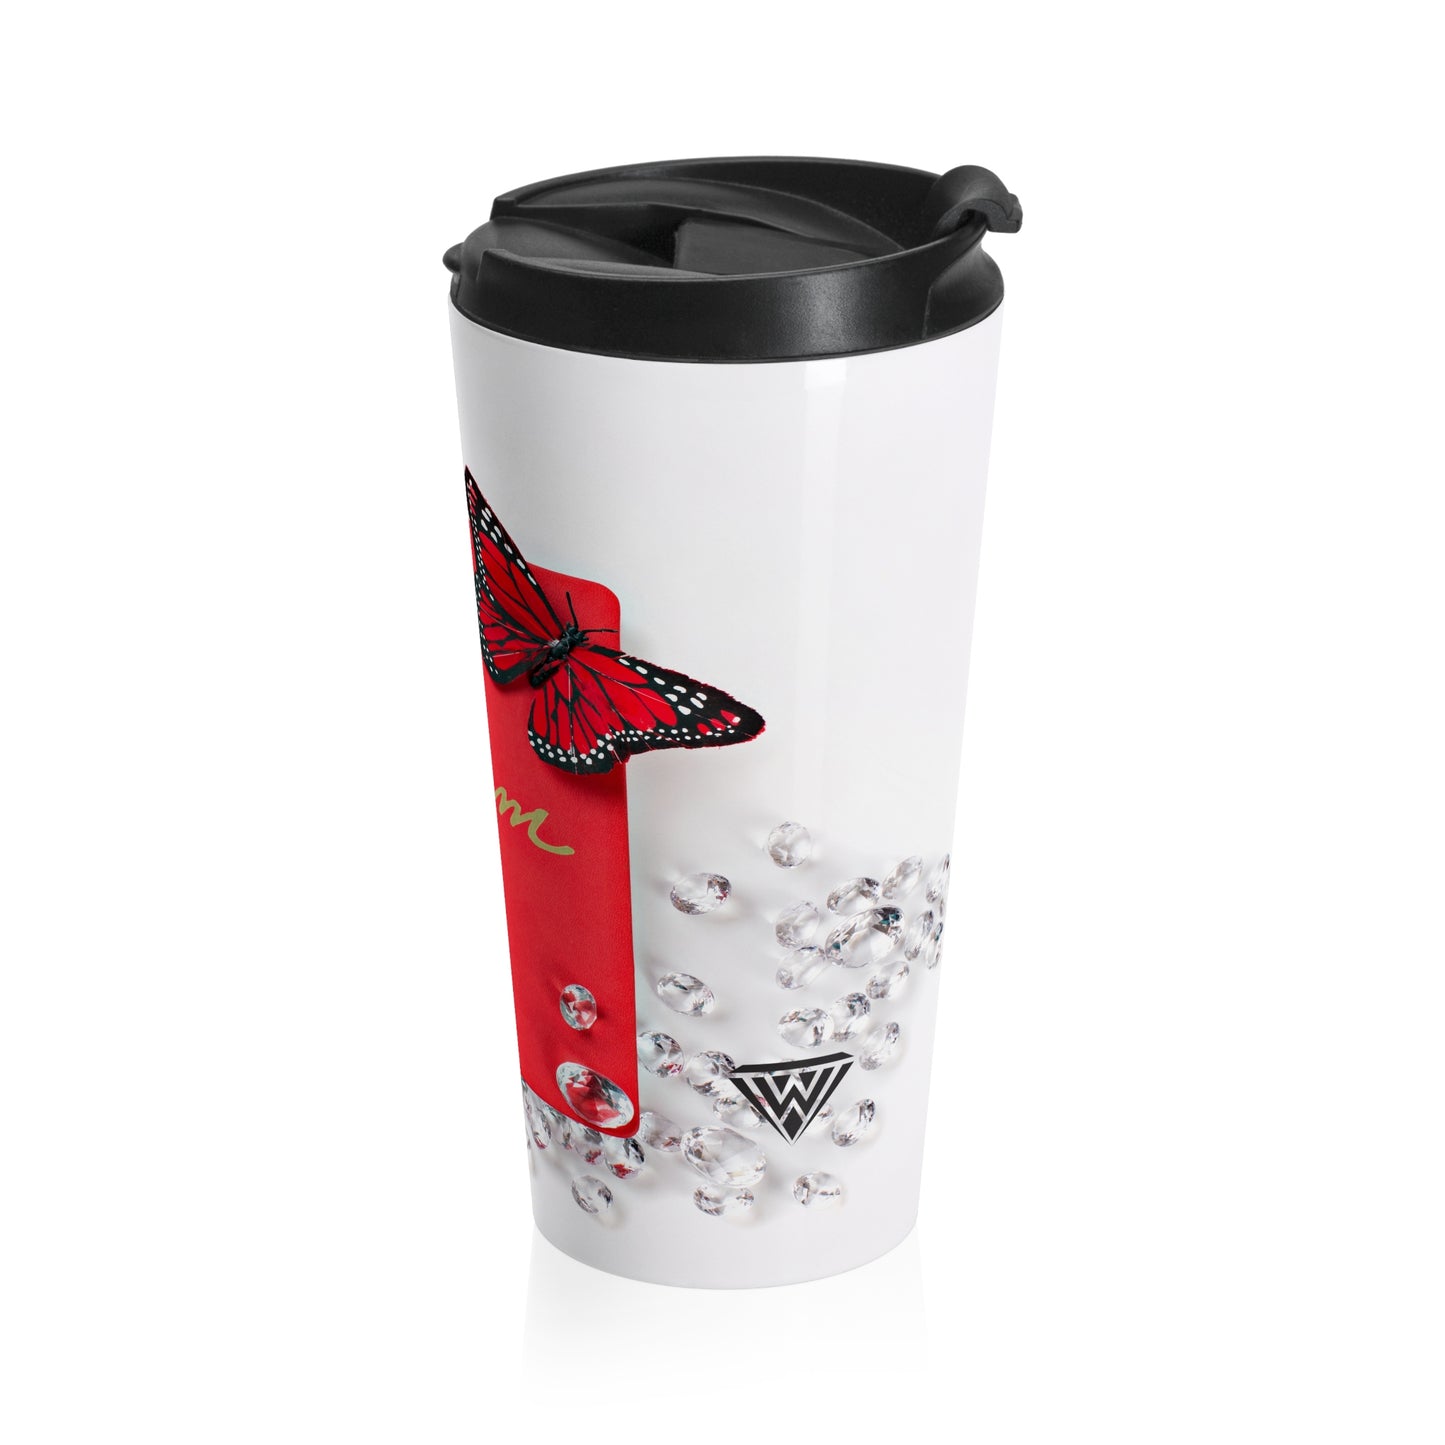 Stainless Steel Travel Mug (Diamonds Red Butterfly)